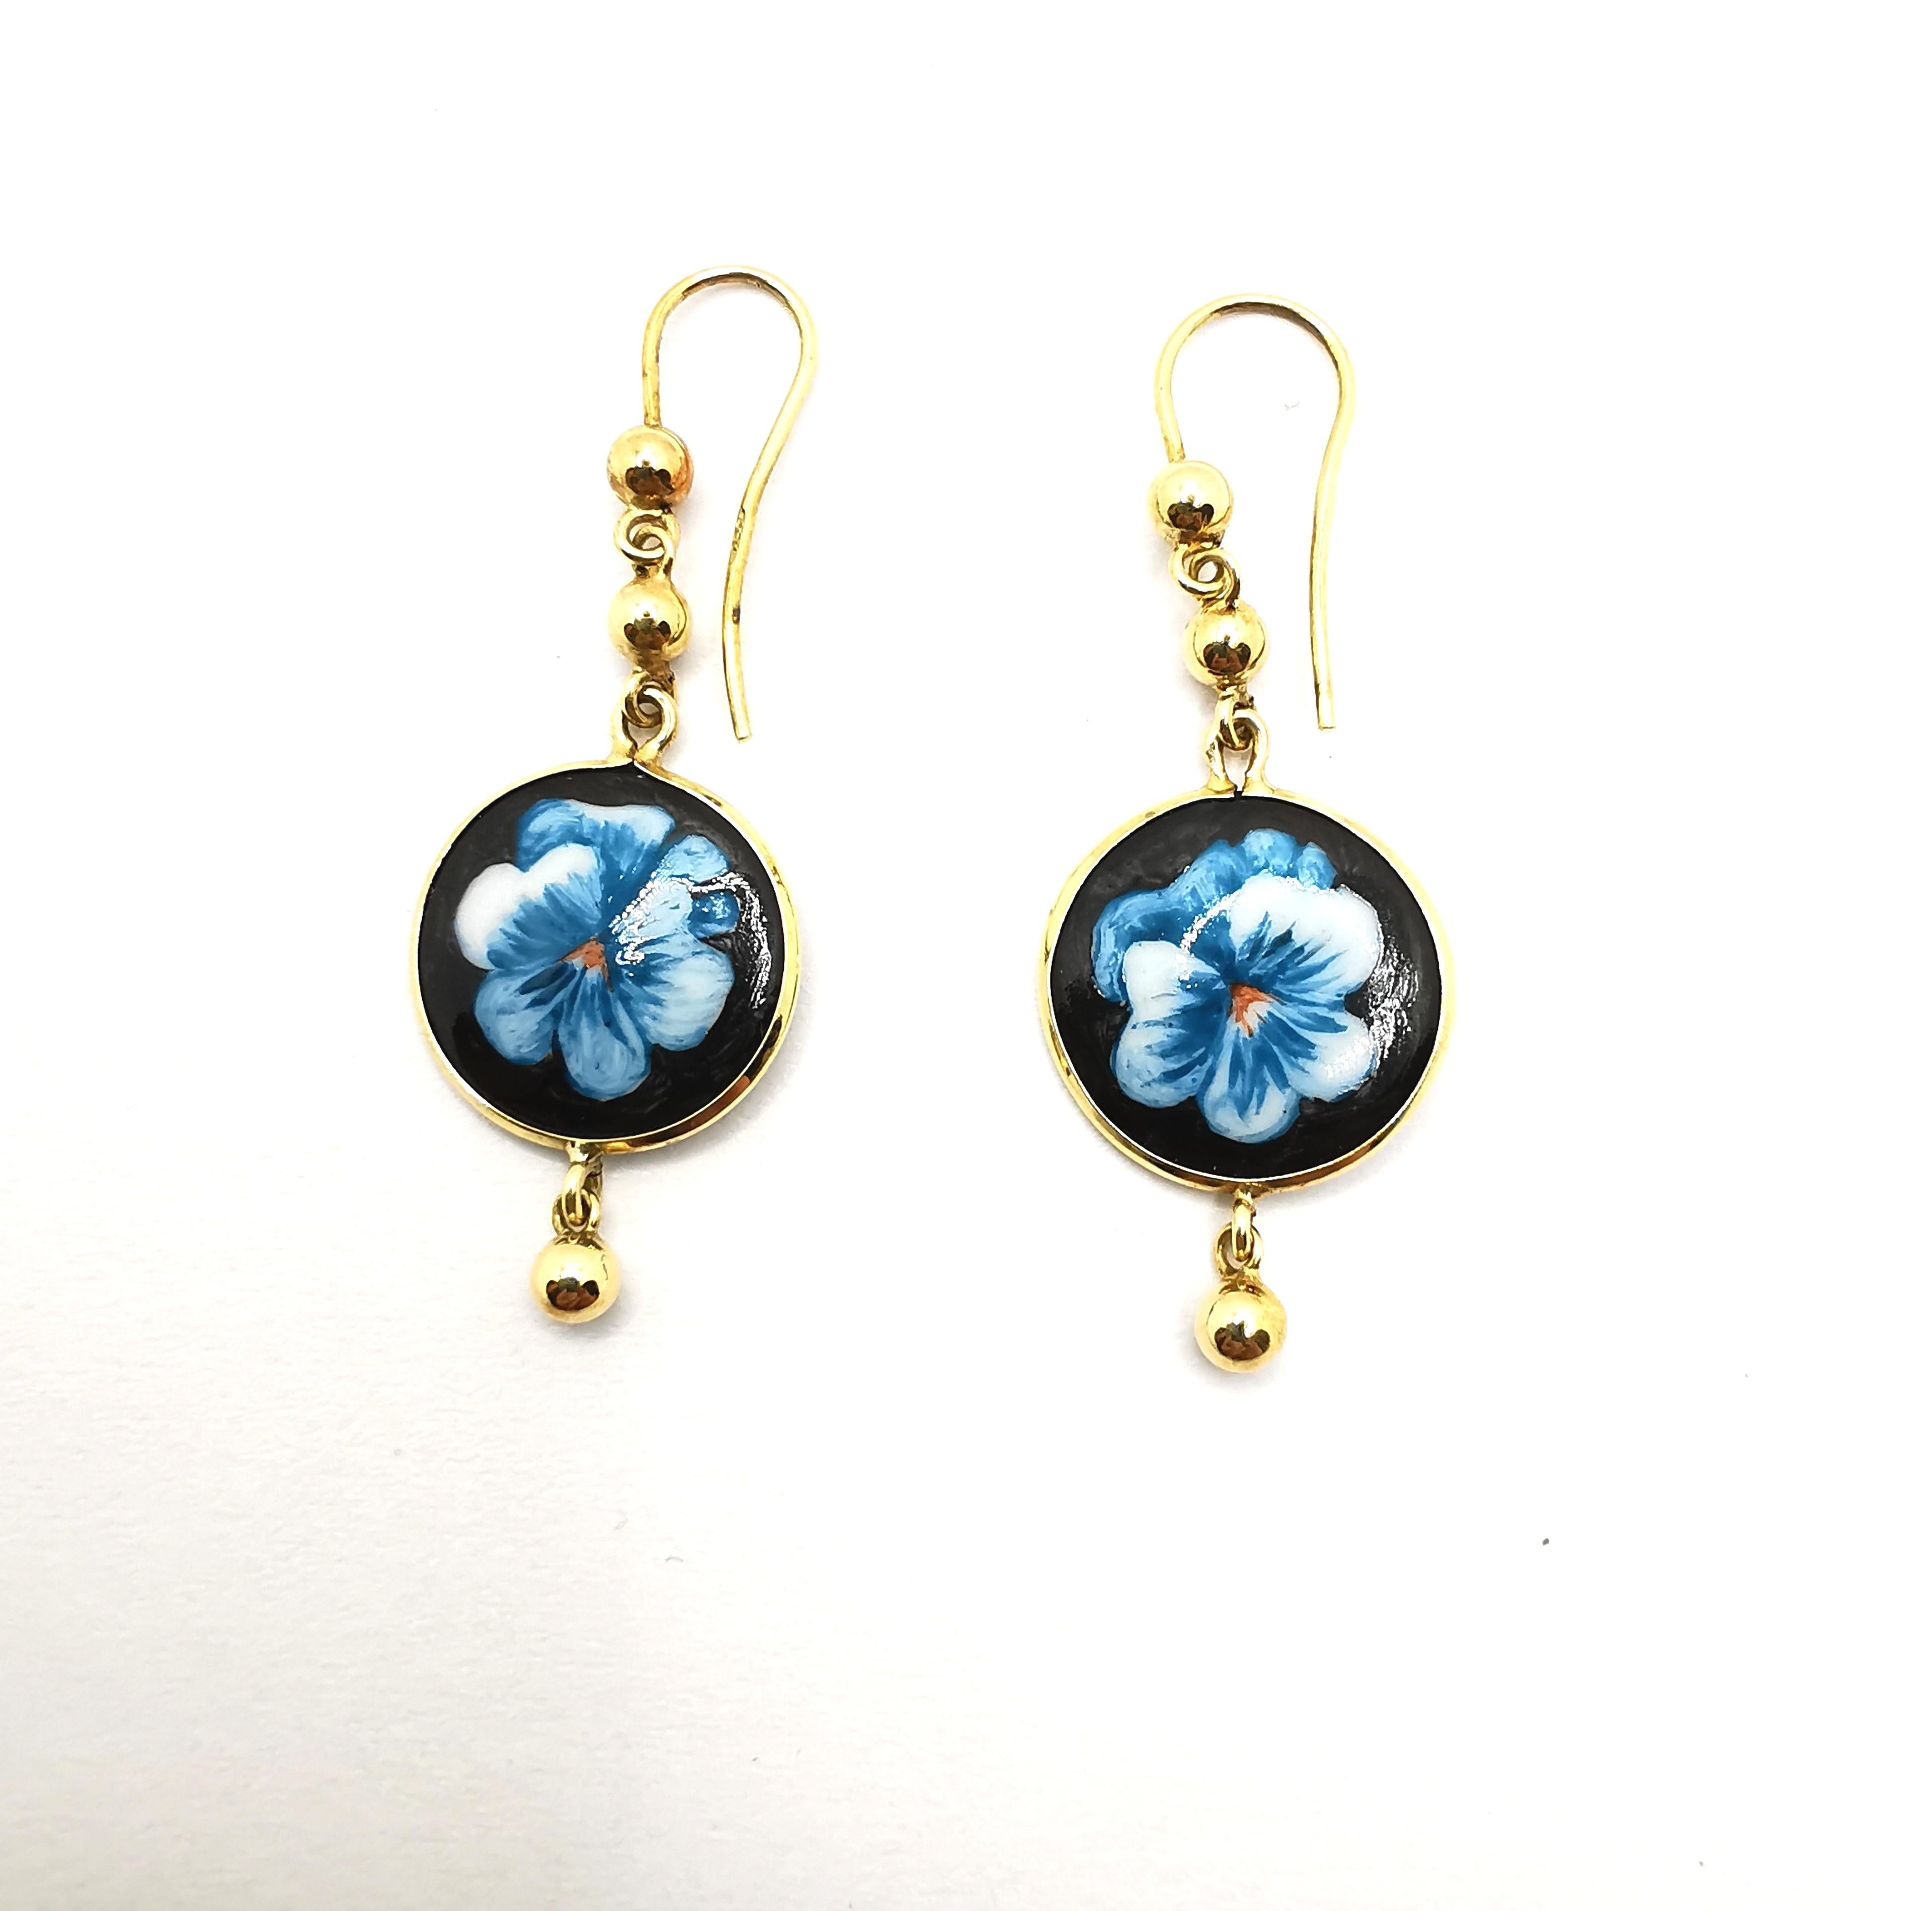 A cute pair of 18kt yellow gold and hand-painted porcelain dangle earrings.
The two inserts are painted in a floral pattern and bear the artist's signature on the back.
Each earring is embellished with three yellow gold spheres.
They are completely